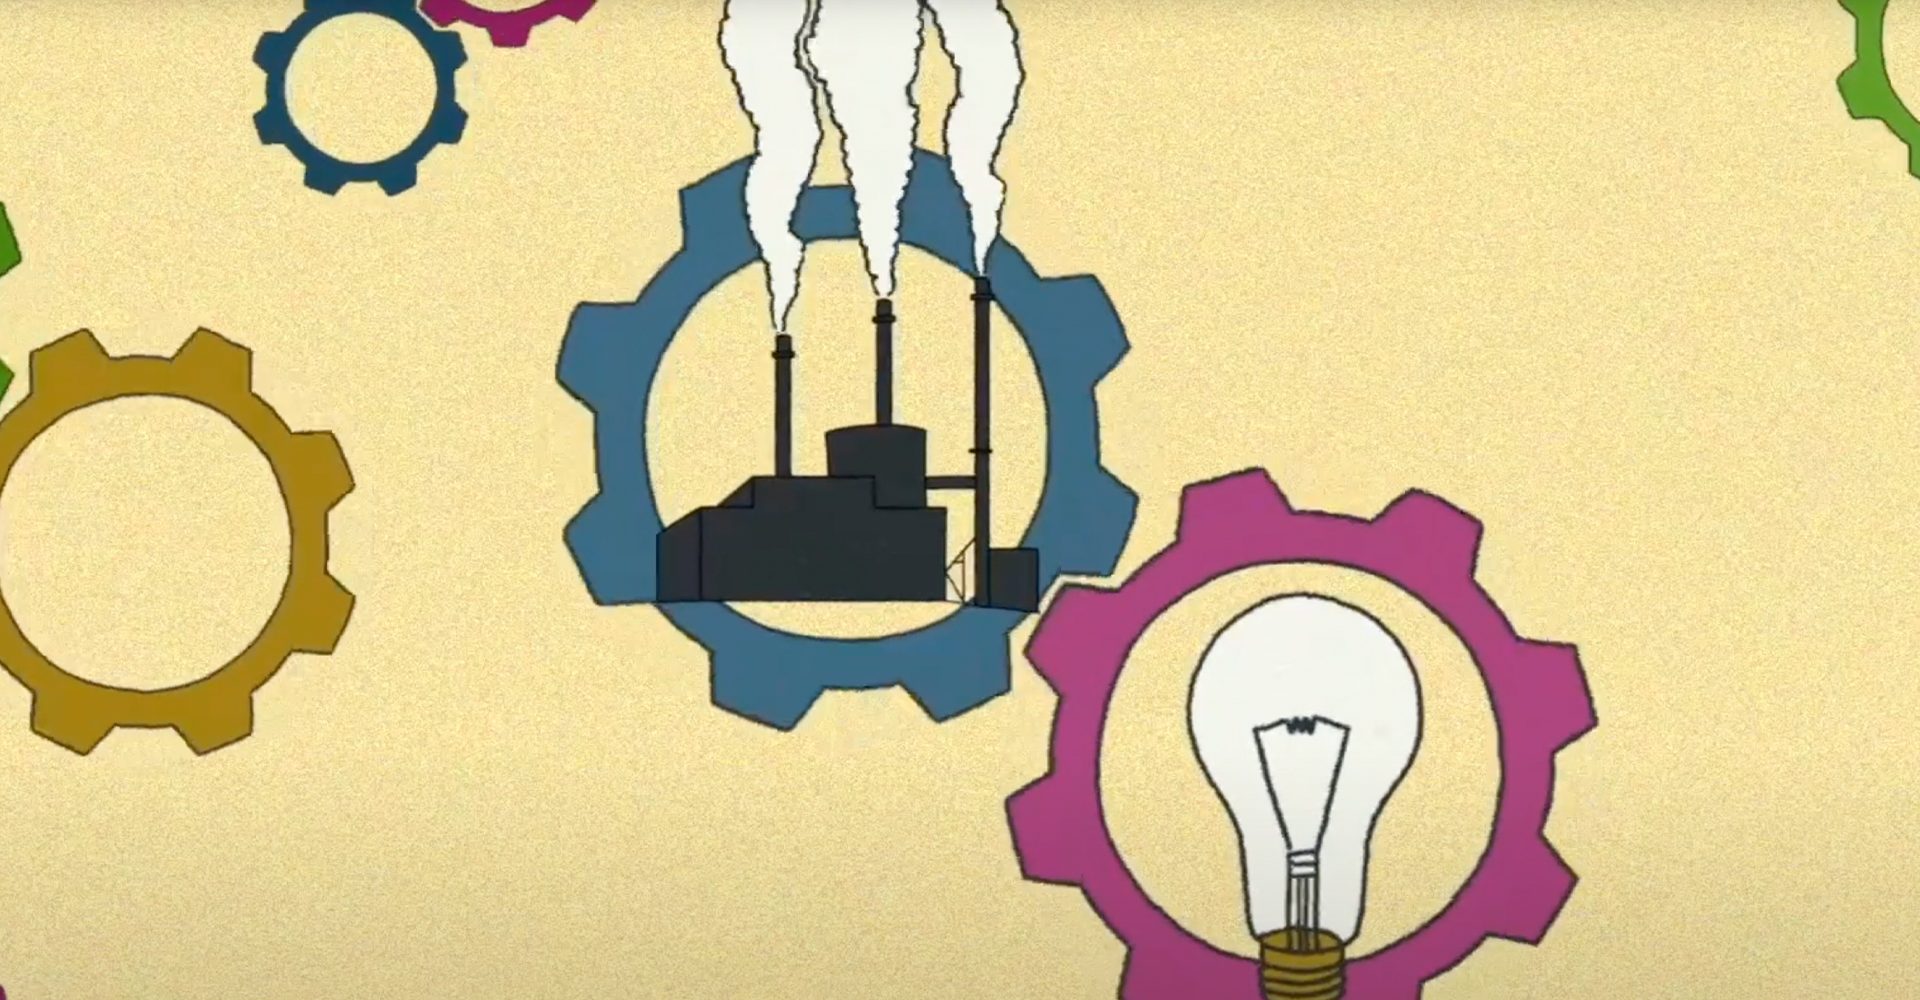 illustrated power station and light bulb in cogs